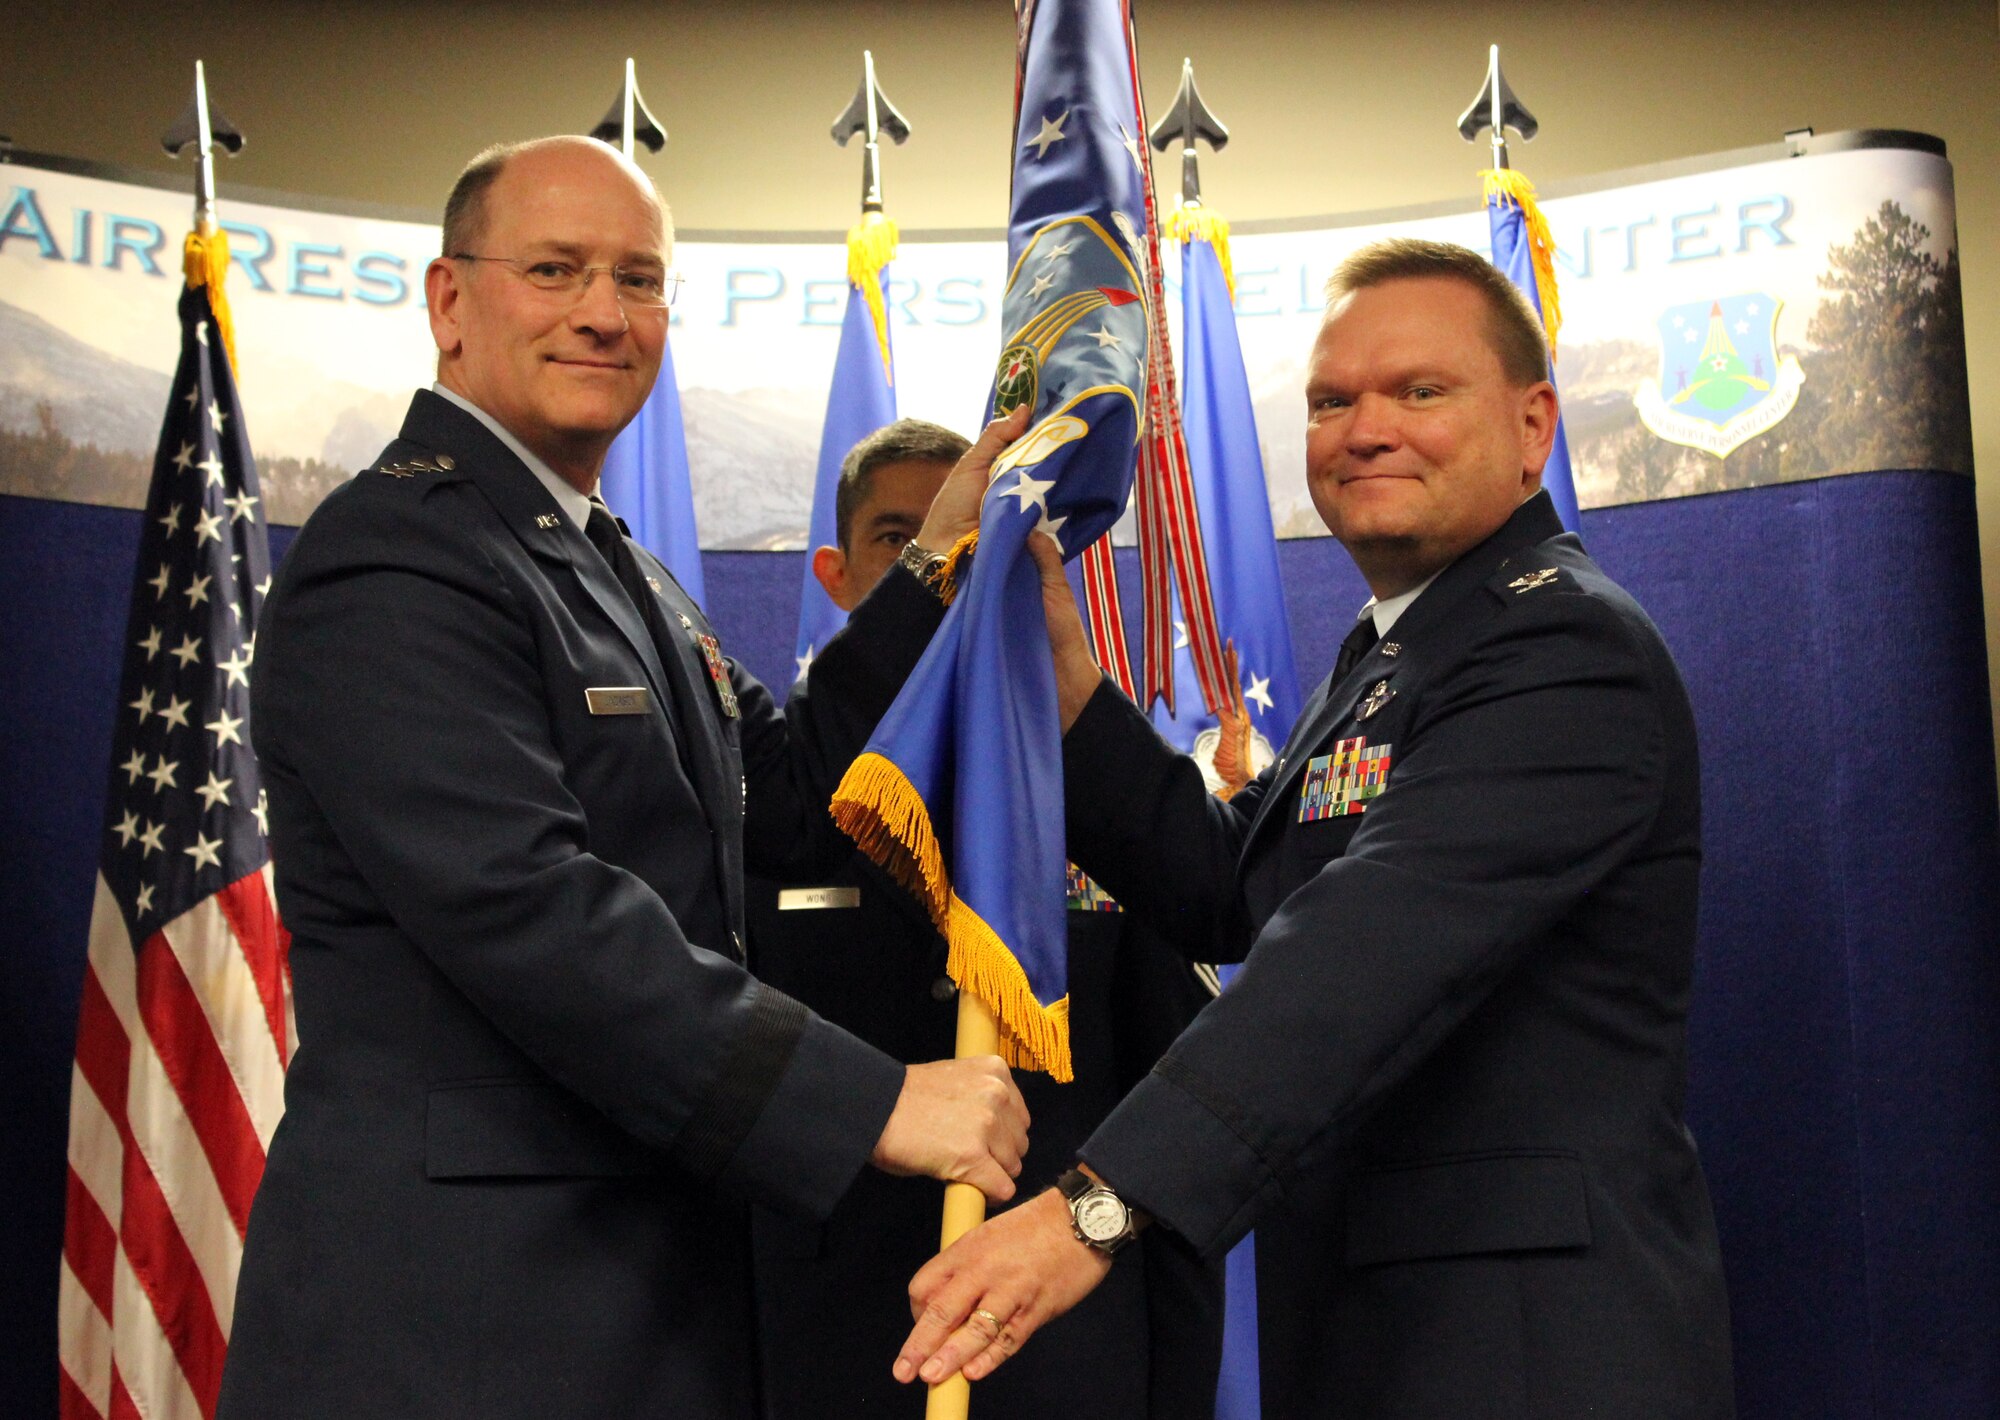 BUCKLEY AIR FORCE BASE, Colo. -- Col. Samuel "Bo" Mahaney assumed command of Air Reserve Personnel Center from Lt. Gen. James "JJ" Jackson, commander, Air Force Reserve Commmand, while ARPC Command Chief Master Sgt. Brian Wong looks on in a ceremony Nov. 5, 2013, at Buckley AFB, Colo. Mahaney comes from being wing commander at 452nd Air Mobility Wing, March Air Reserve Base, Calif. (U.S. Air Force photo/Master Sgt. Christian Michael)